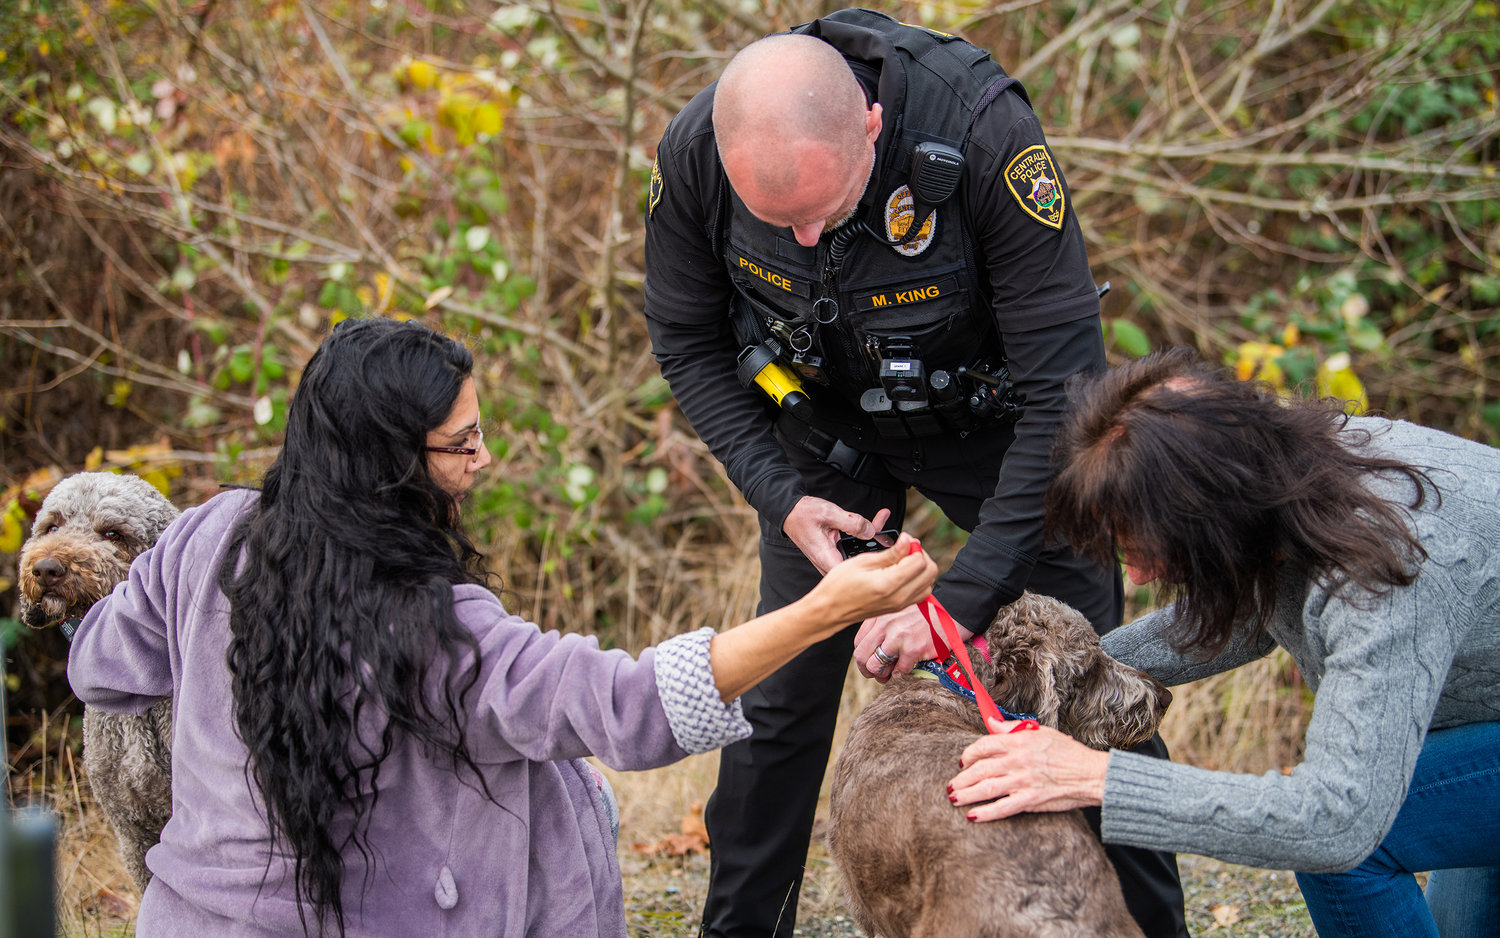 Maricruz Valencia, of Rochester, holds a leash so Officer M. King, with the Centralia Police Department, could gather information as April Thornton, of Centralia, helps find the tags for Buddy and Spike, two poodle-crosses, who left their property along Russell Road in Centralia before walking through traffic near Interstate 5 where they were captured off Airport Road and later returned to their owner.